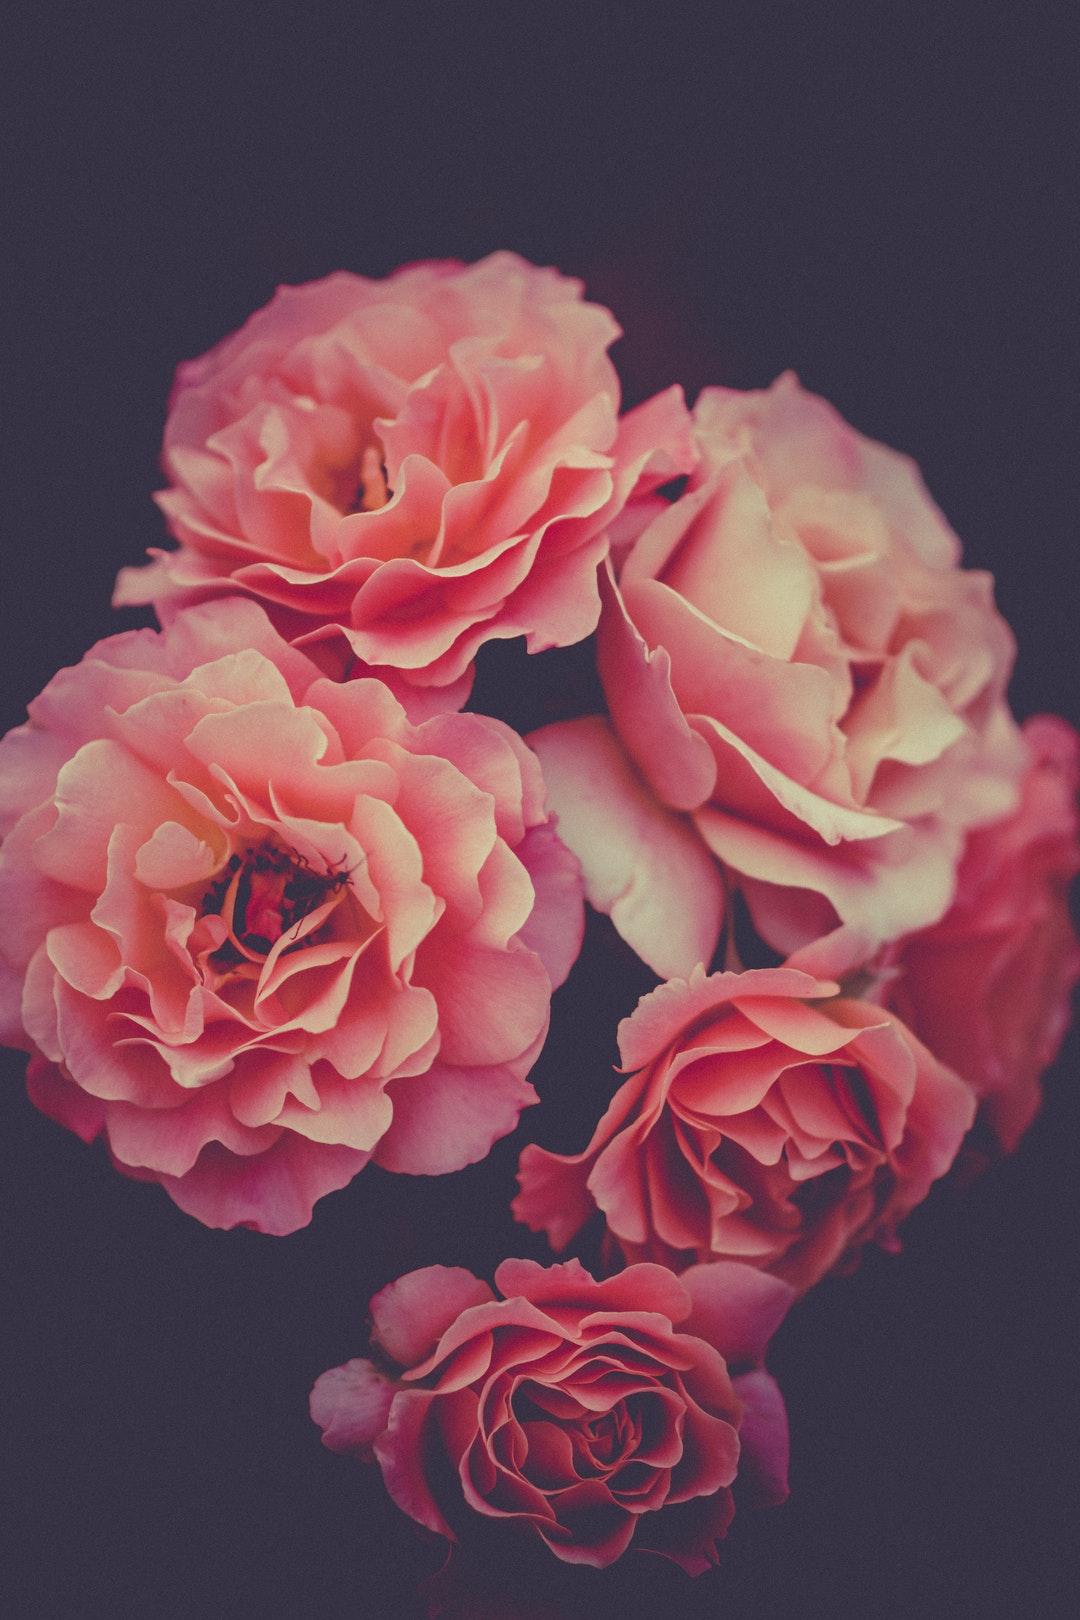 Pink Carnation Picture. Download Free Image